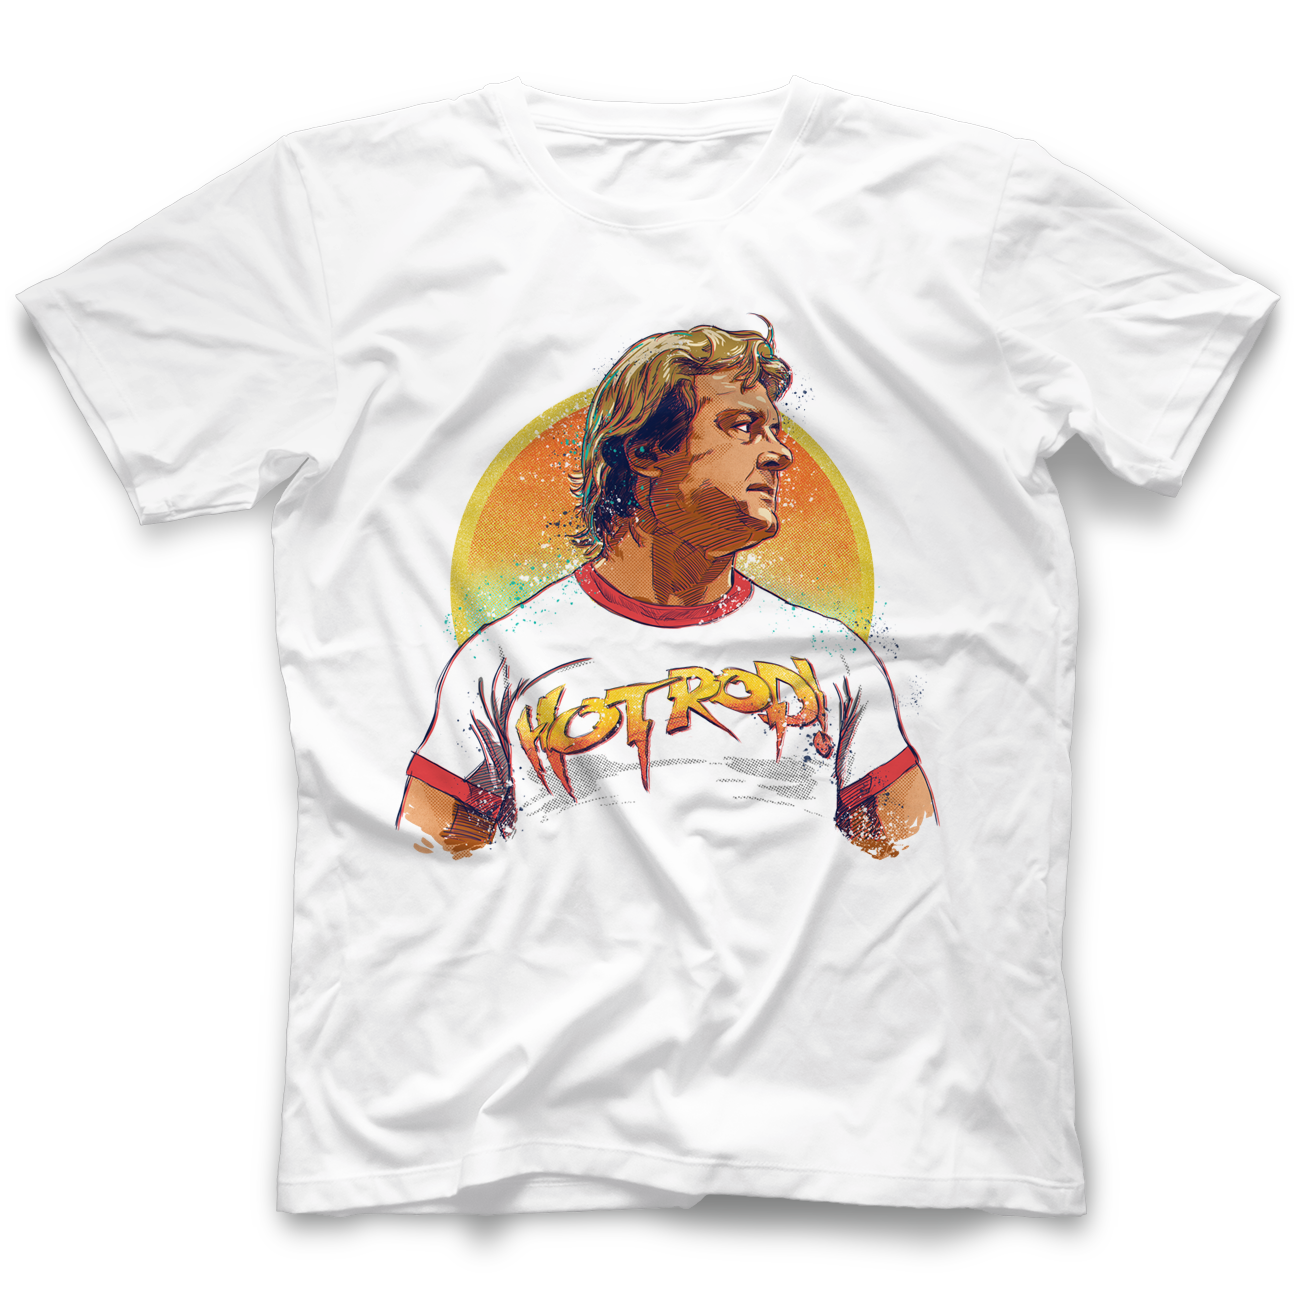 Rowdy Roddy Piper by 500 Level T-Shirt